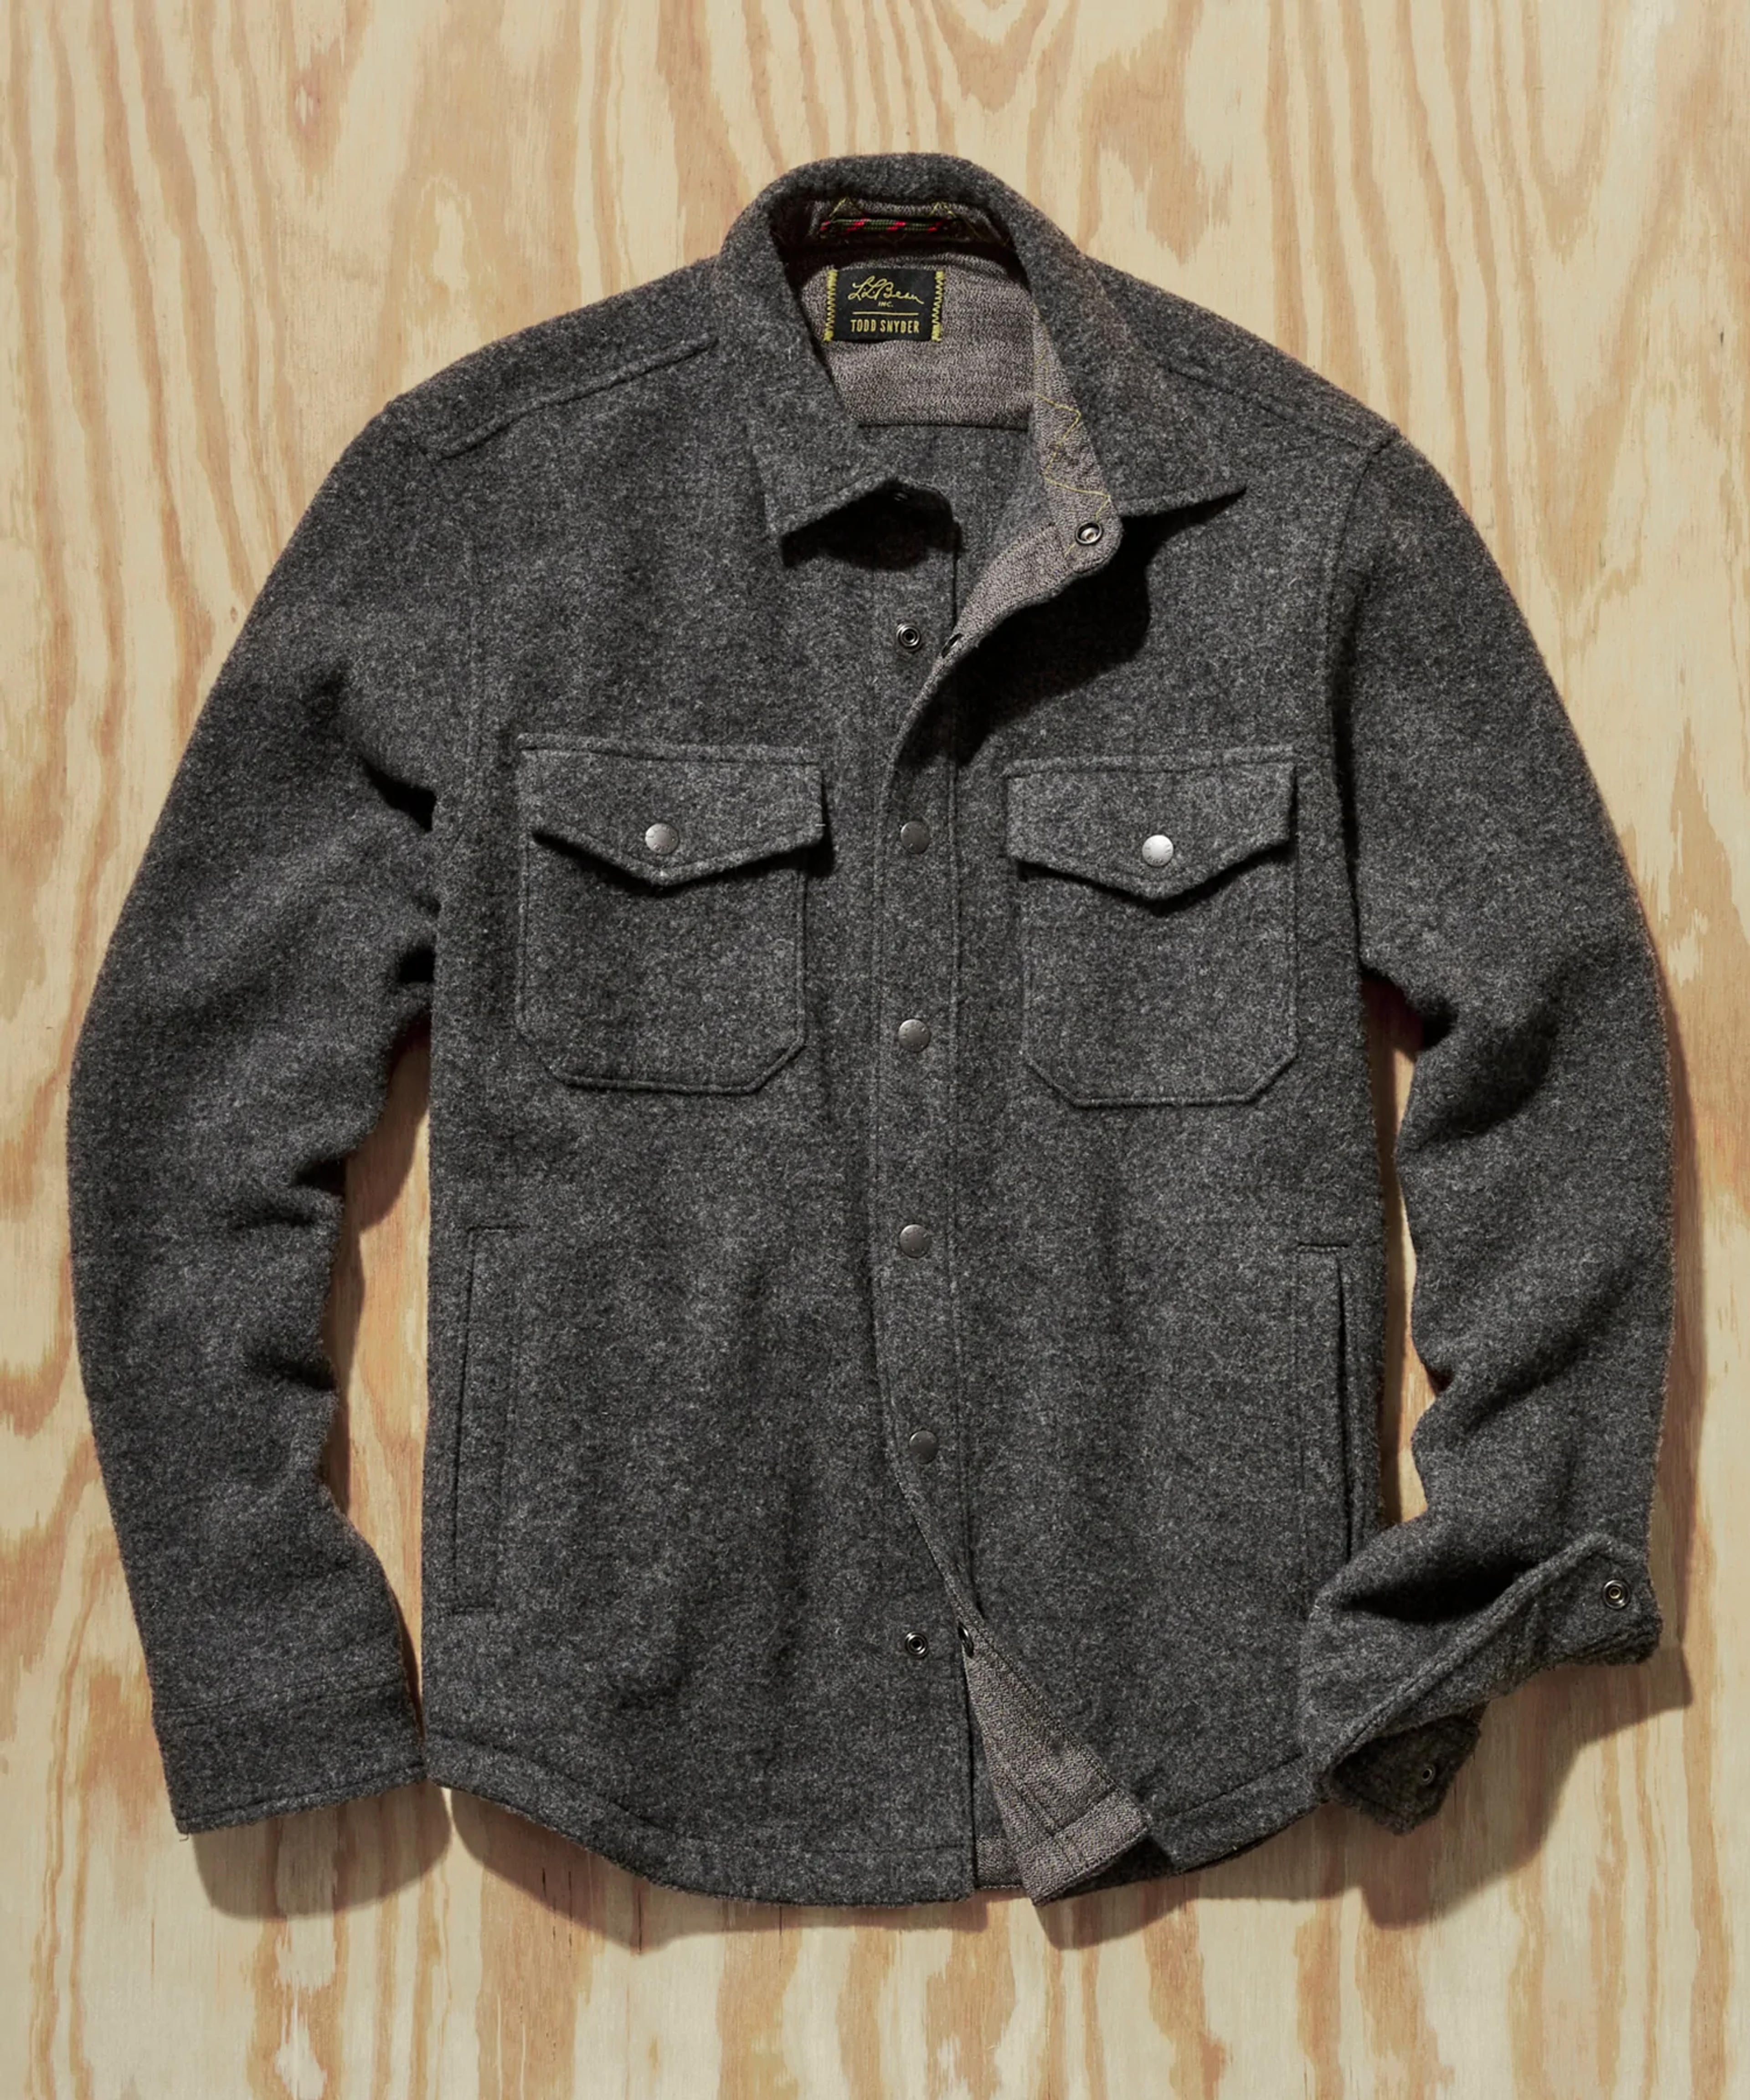 L.L.Bean x Todd Snyder Wool Shirt Jacket in Charcoal Grey - S / CHARCOAL GREY / 512241-GY60